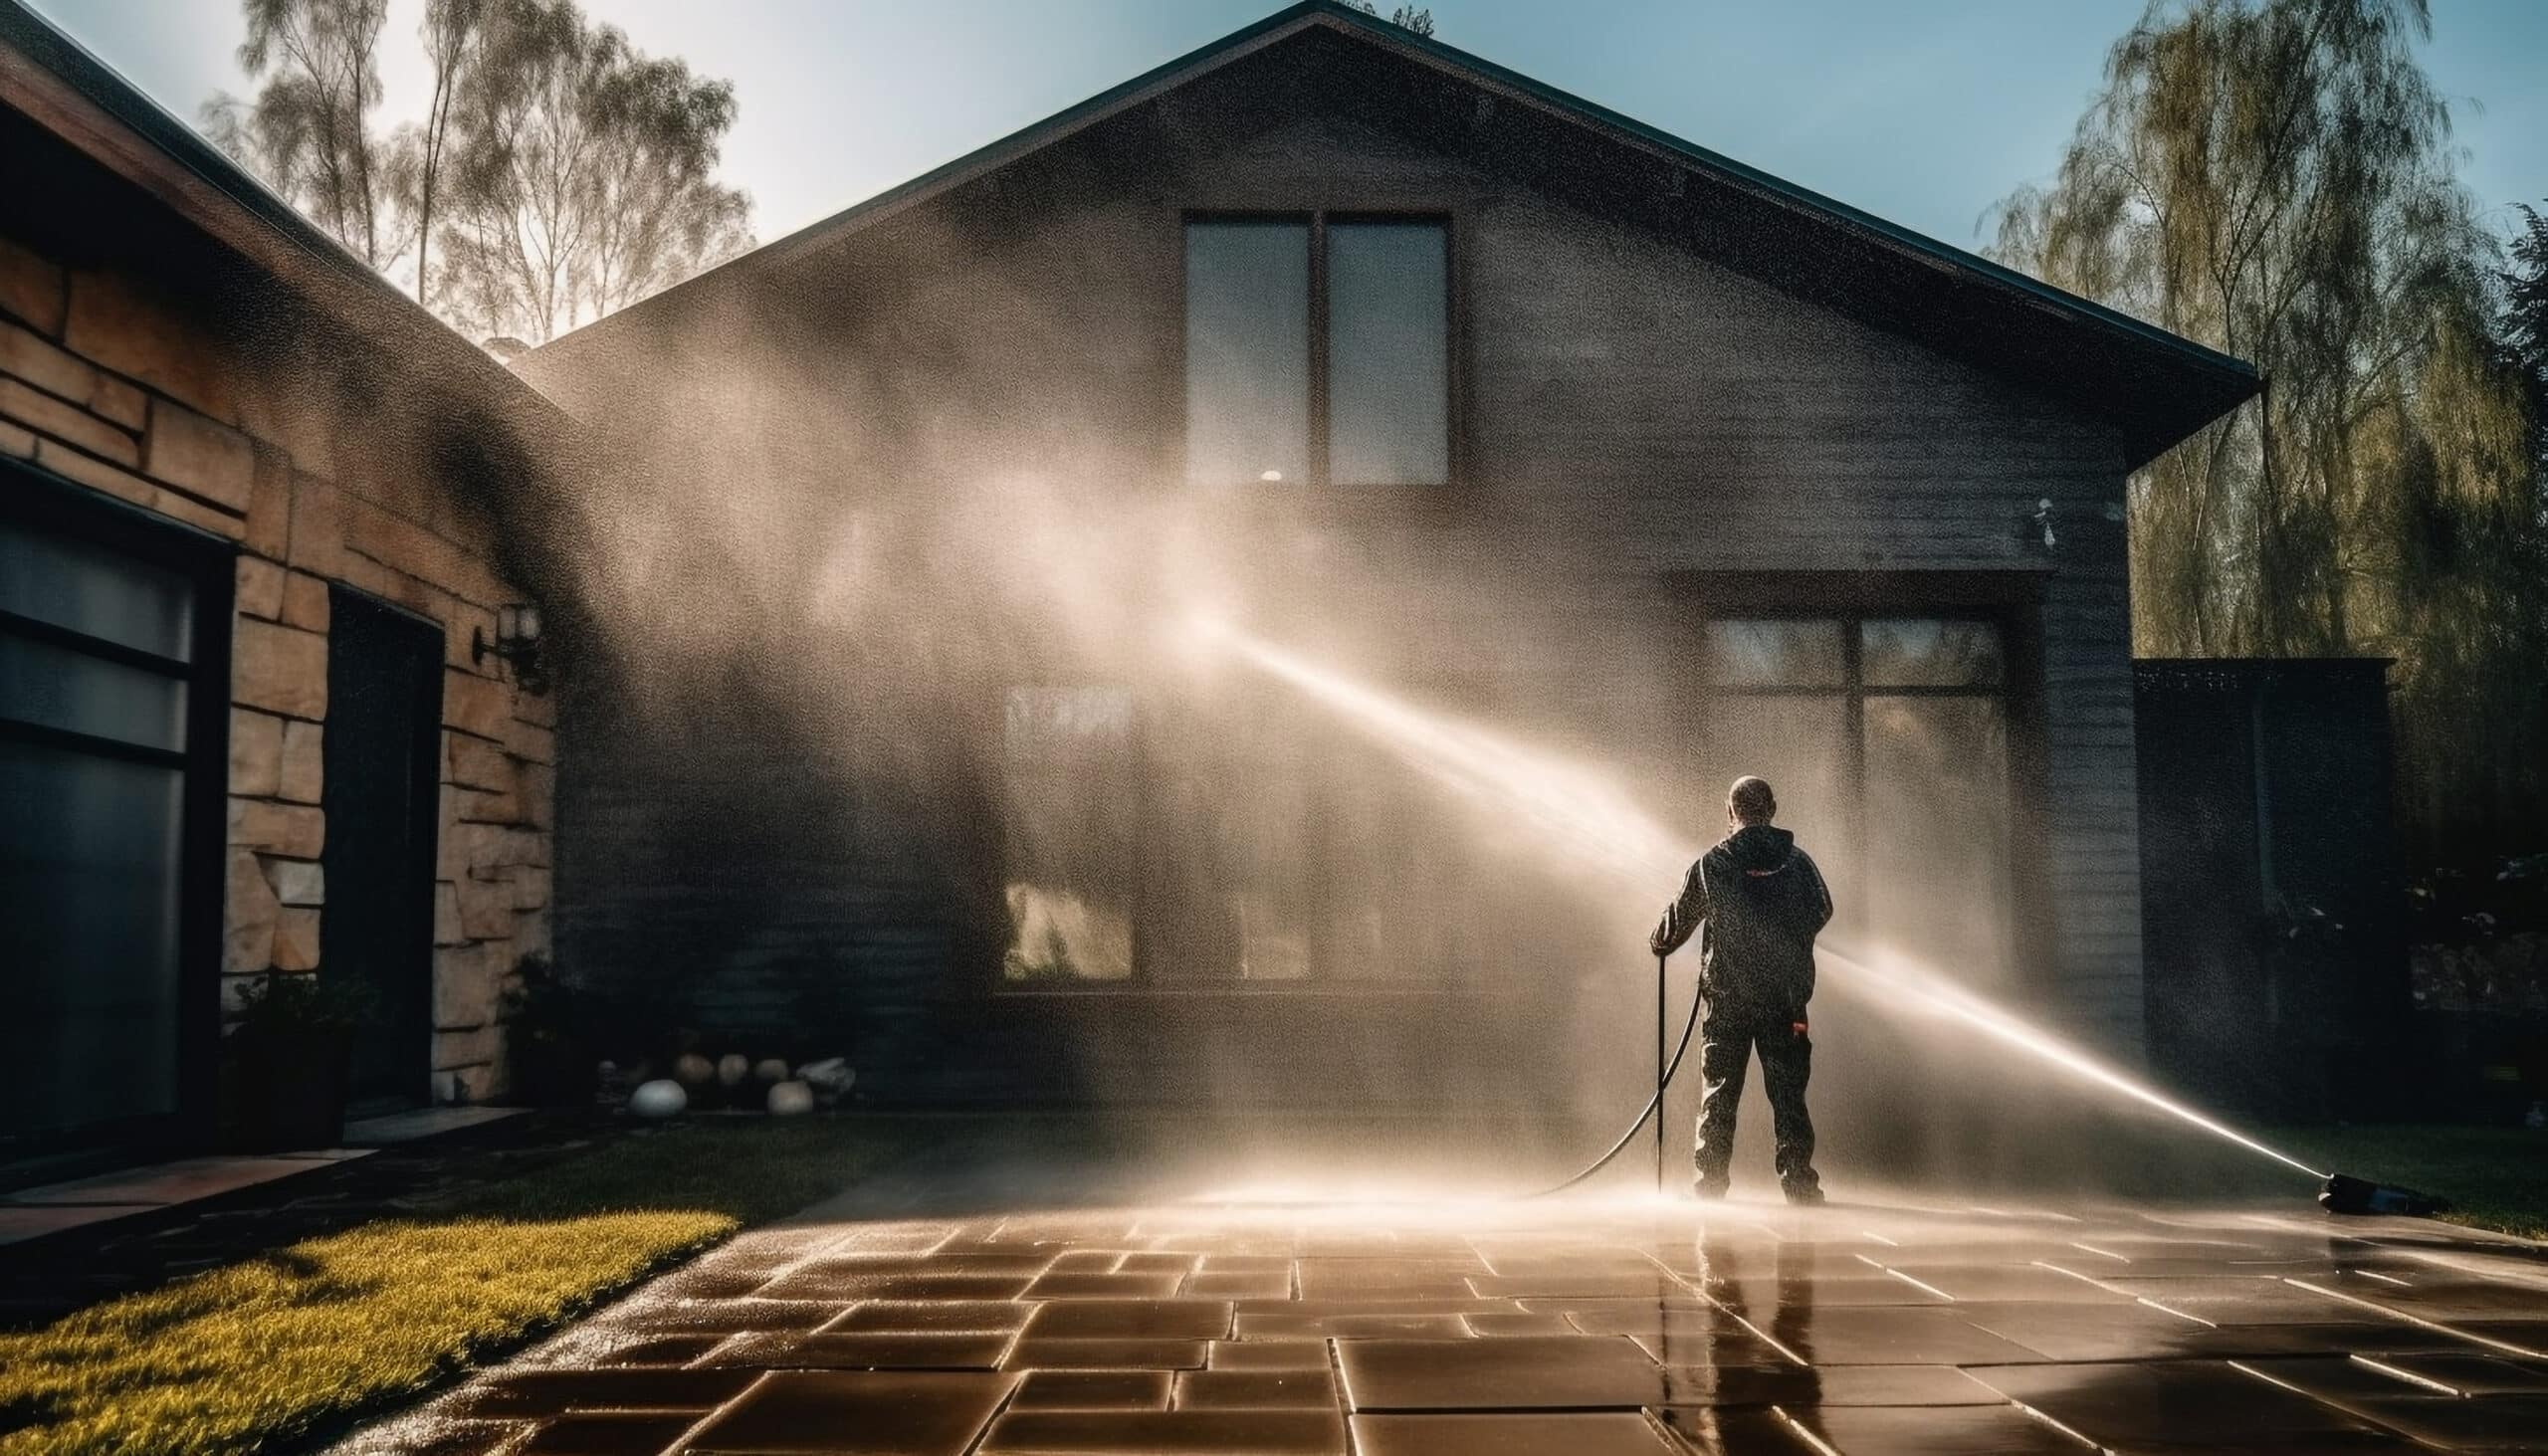 www.appr.com : What types of surfaces can I clean with an electric pressure washer?